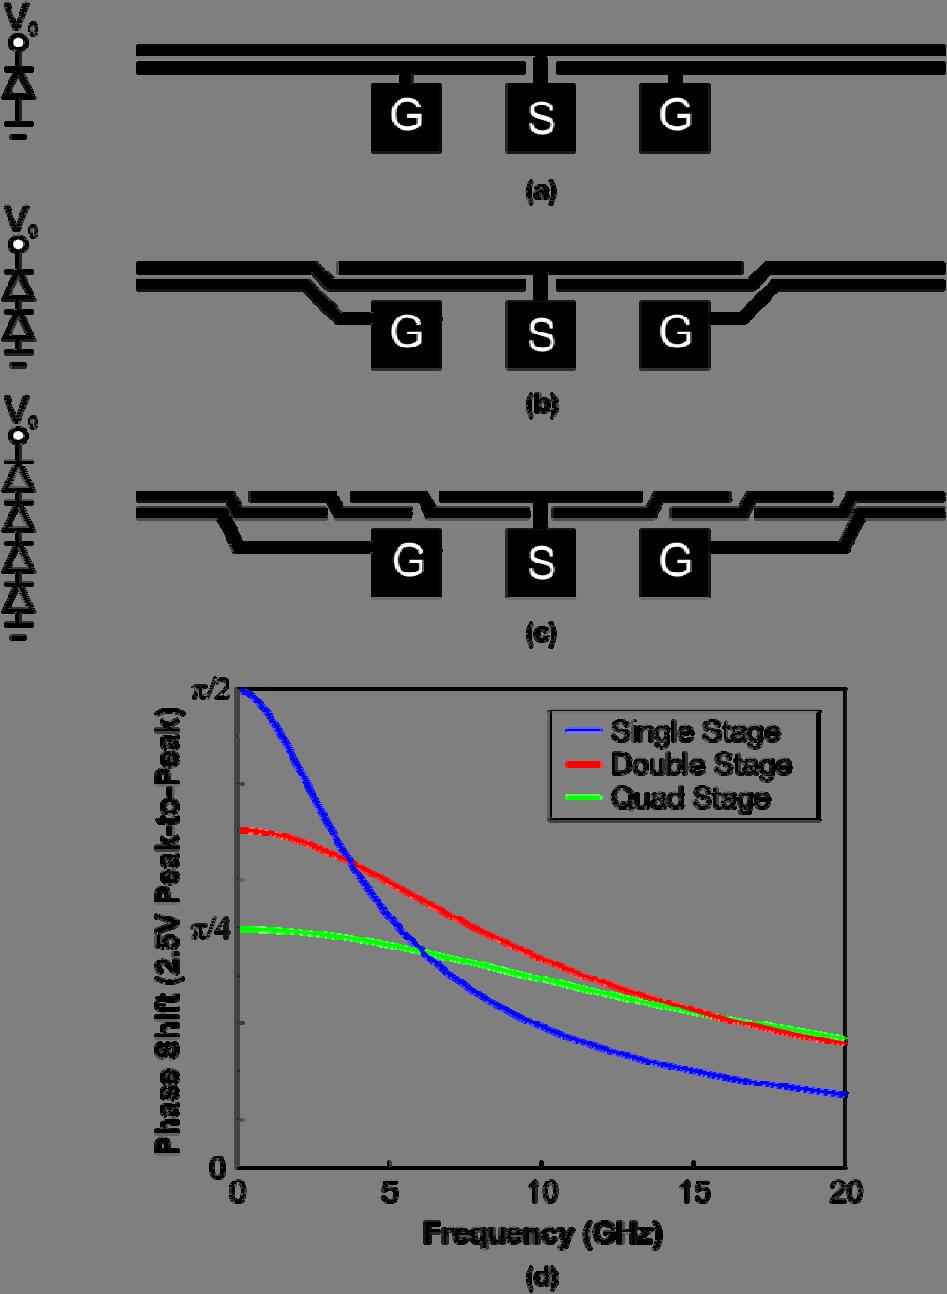 Figure 5. The modulator is broken up into (a) single-, (b) double-, and (c) quad-stage designs hooked up in series in order to flatten its frequency response. Simulation results for a 0.